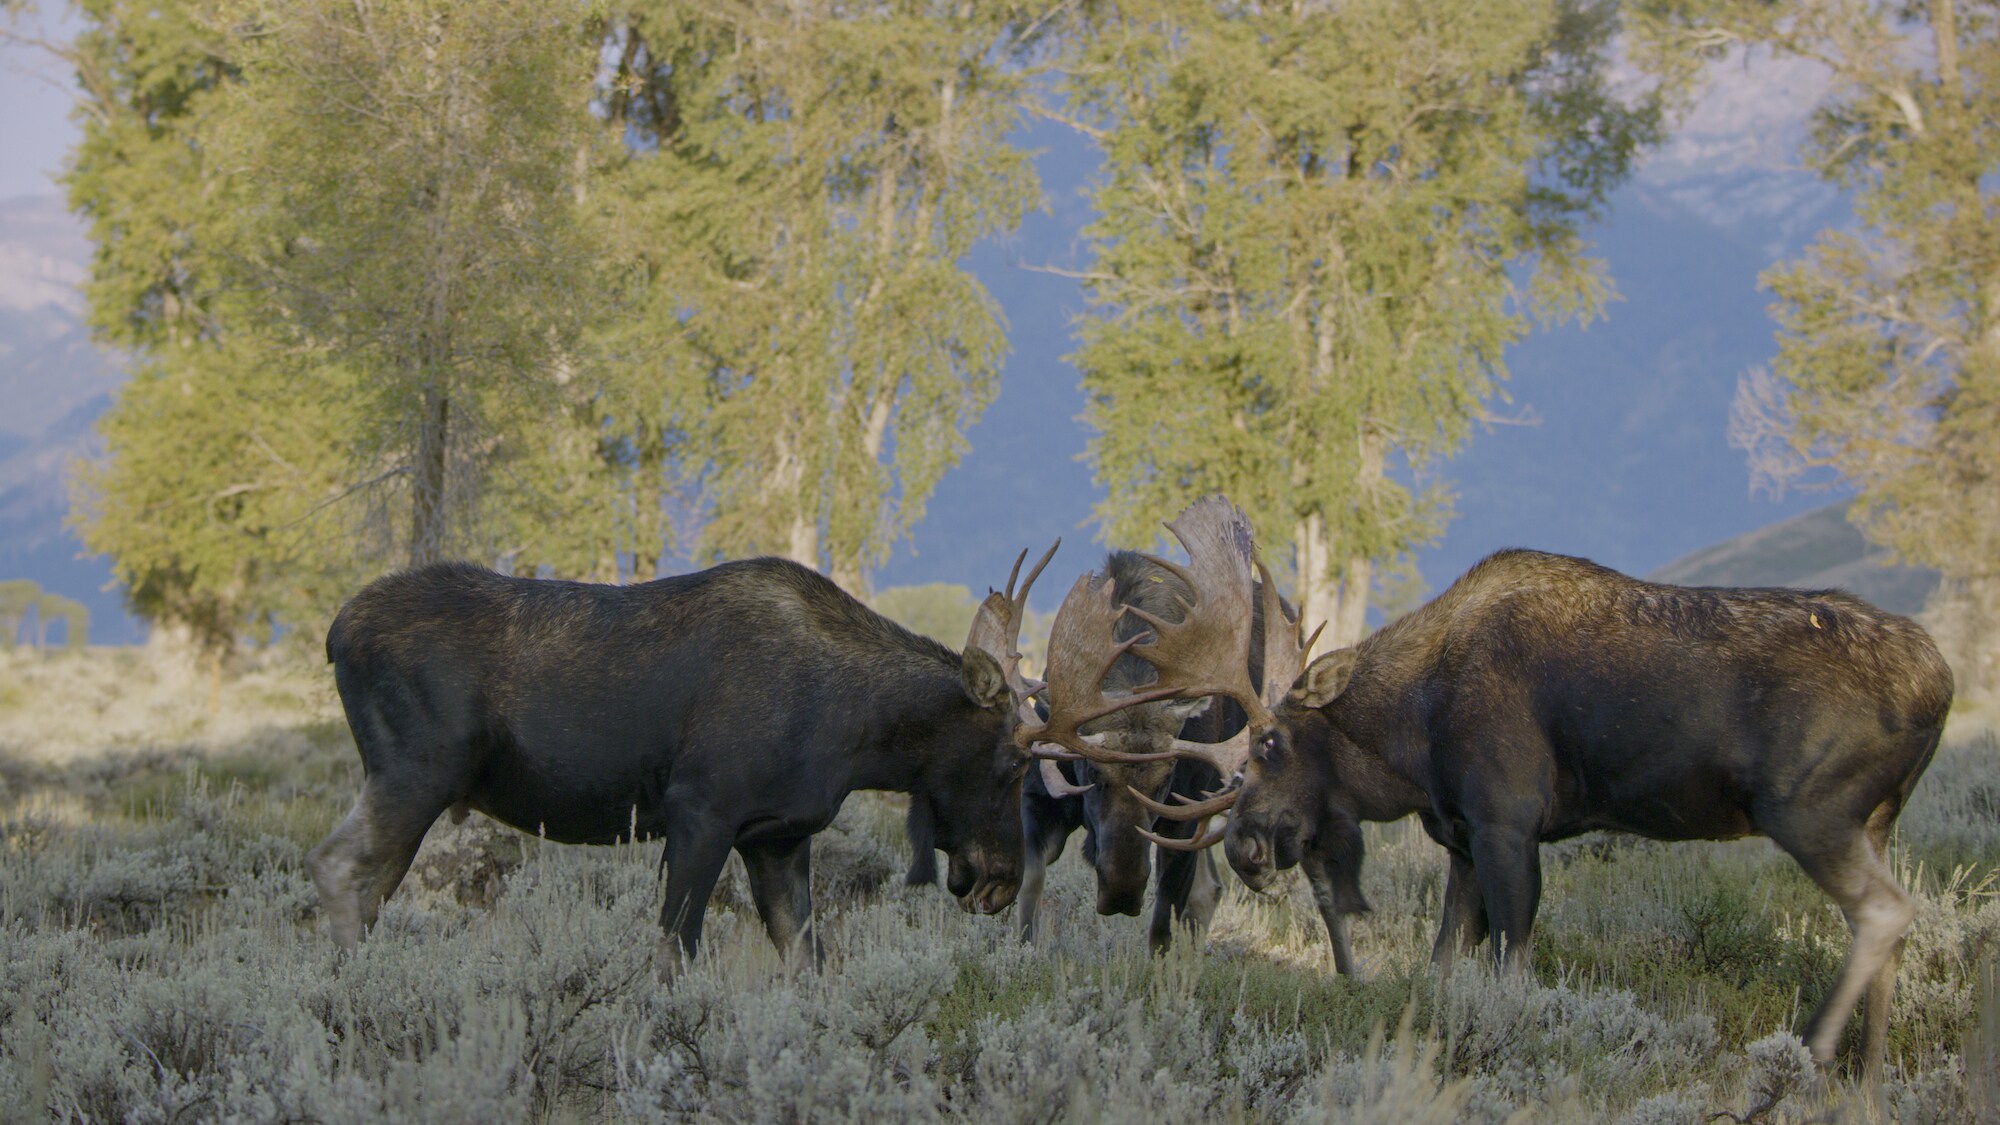 Amorous moose three-way spar during the rut in Grand Teton National Park. (National Geographic for Disney+)